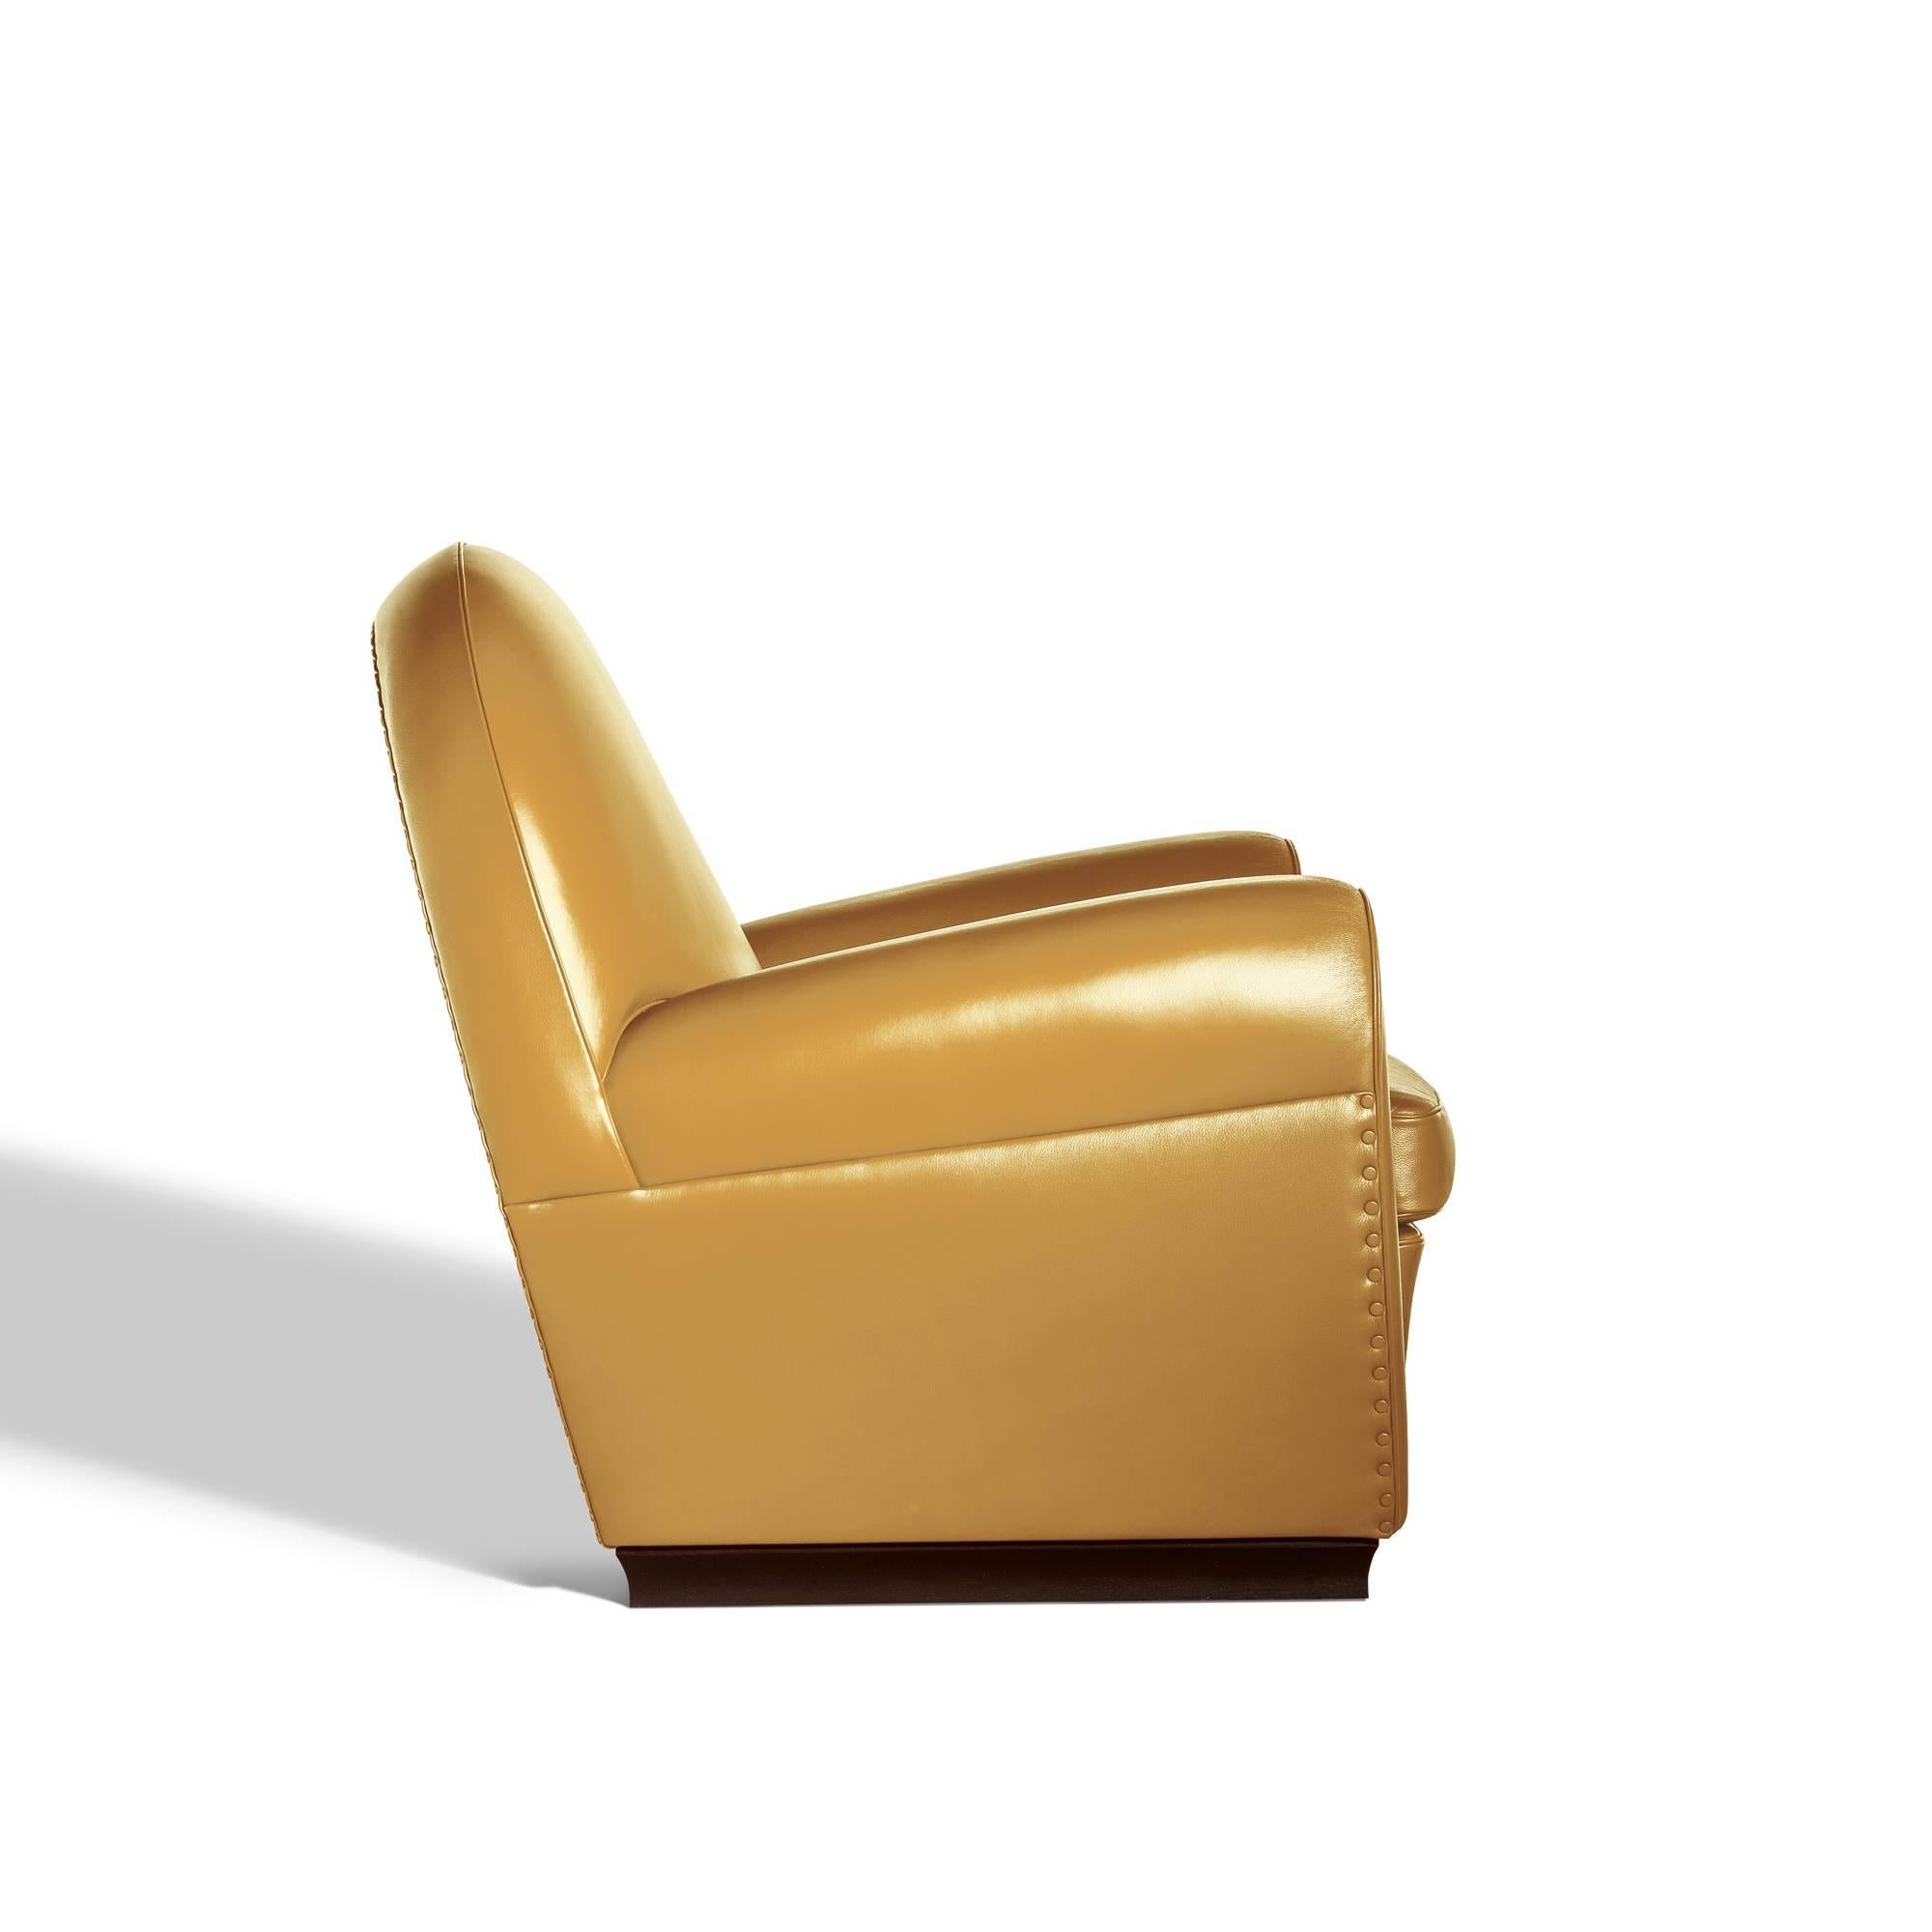 Art Deco Vanity Fair XC Armchair in Genuine Leather Pelle SC 136 Ginger Bread Yellow For Sale